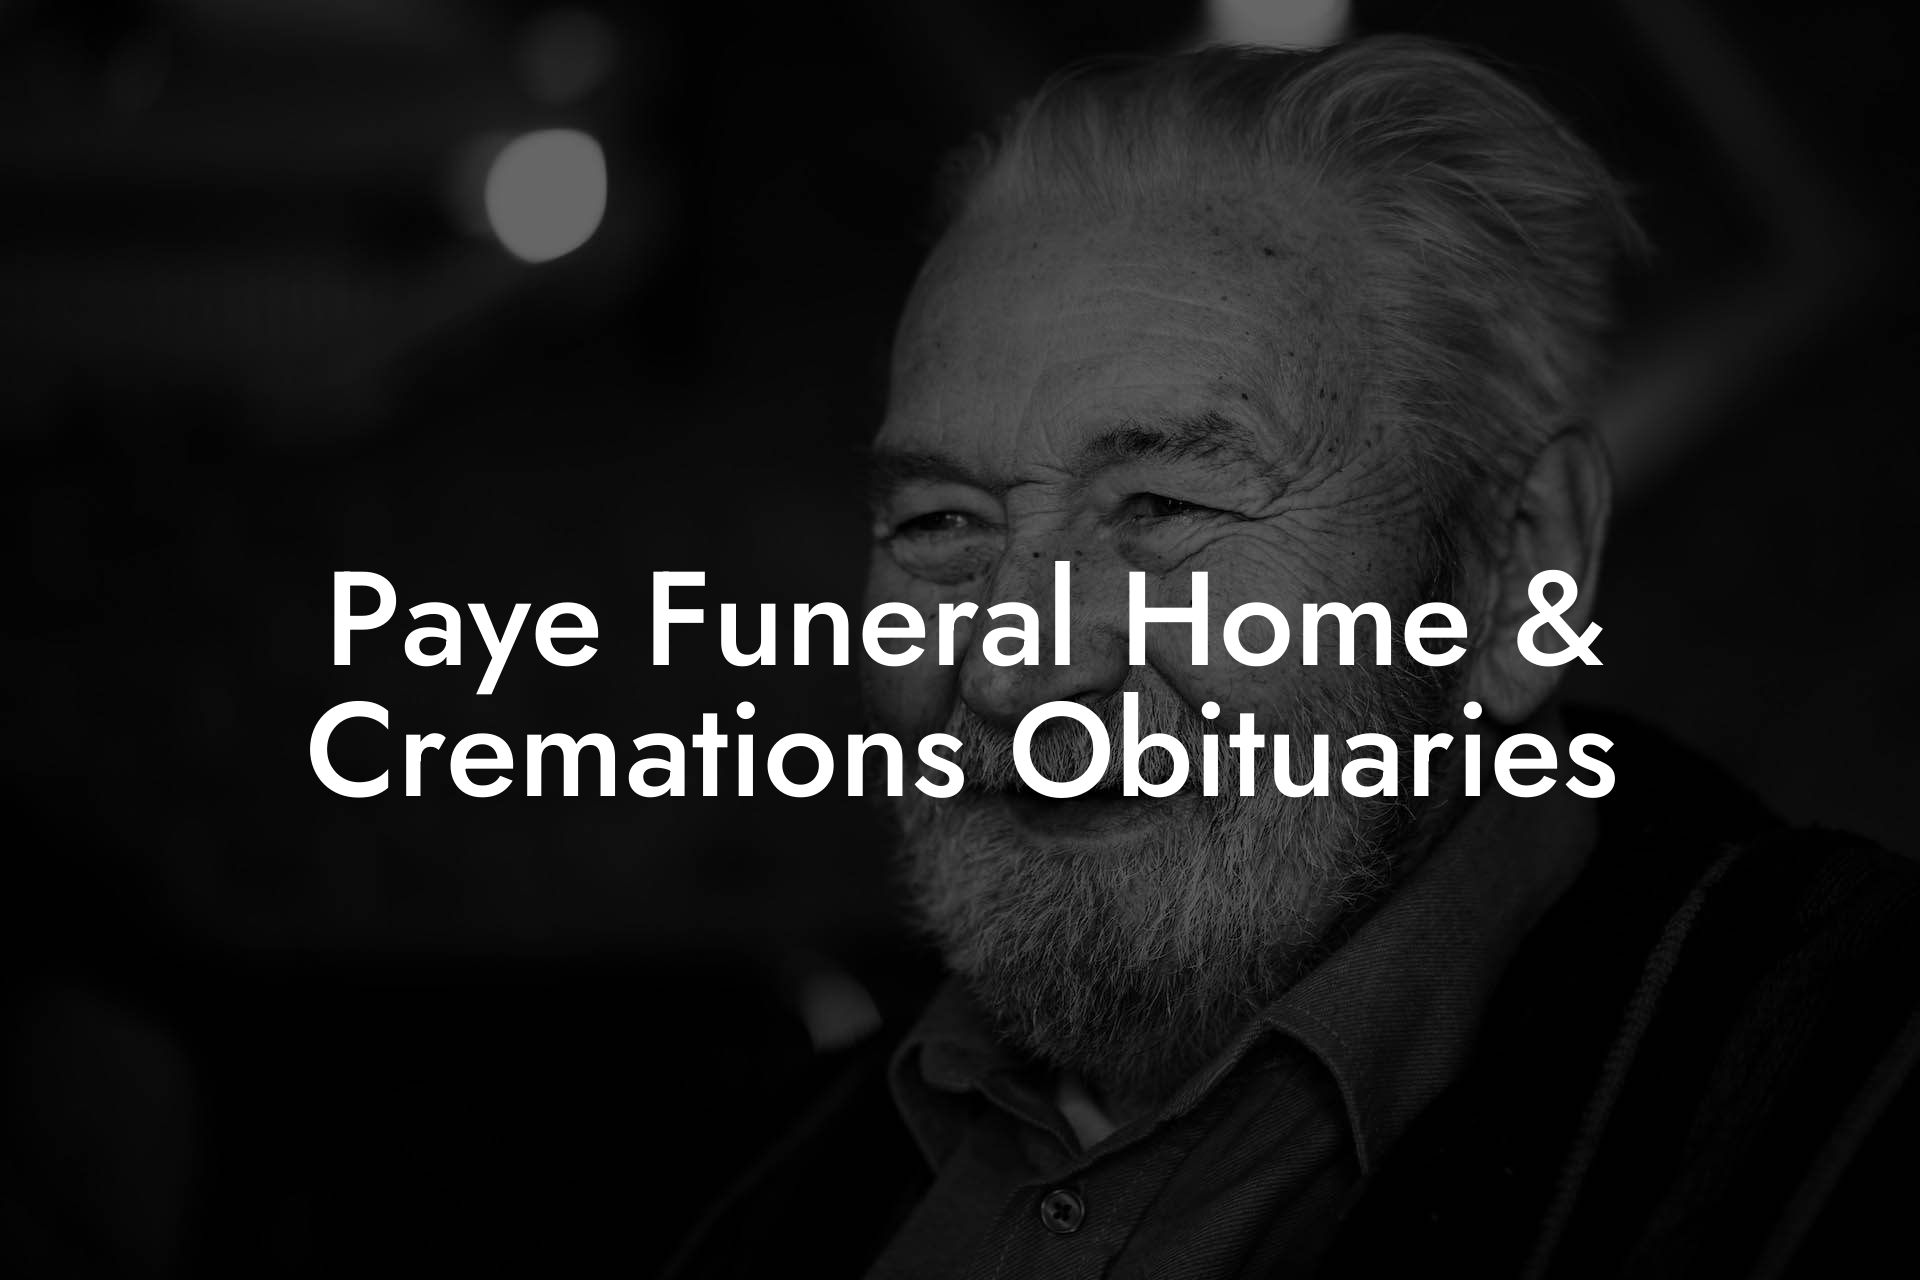 Paye Funeral Home & Cremations Obituaries